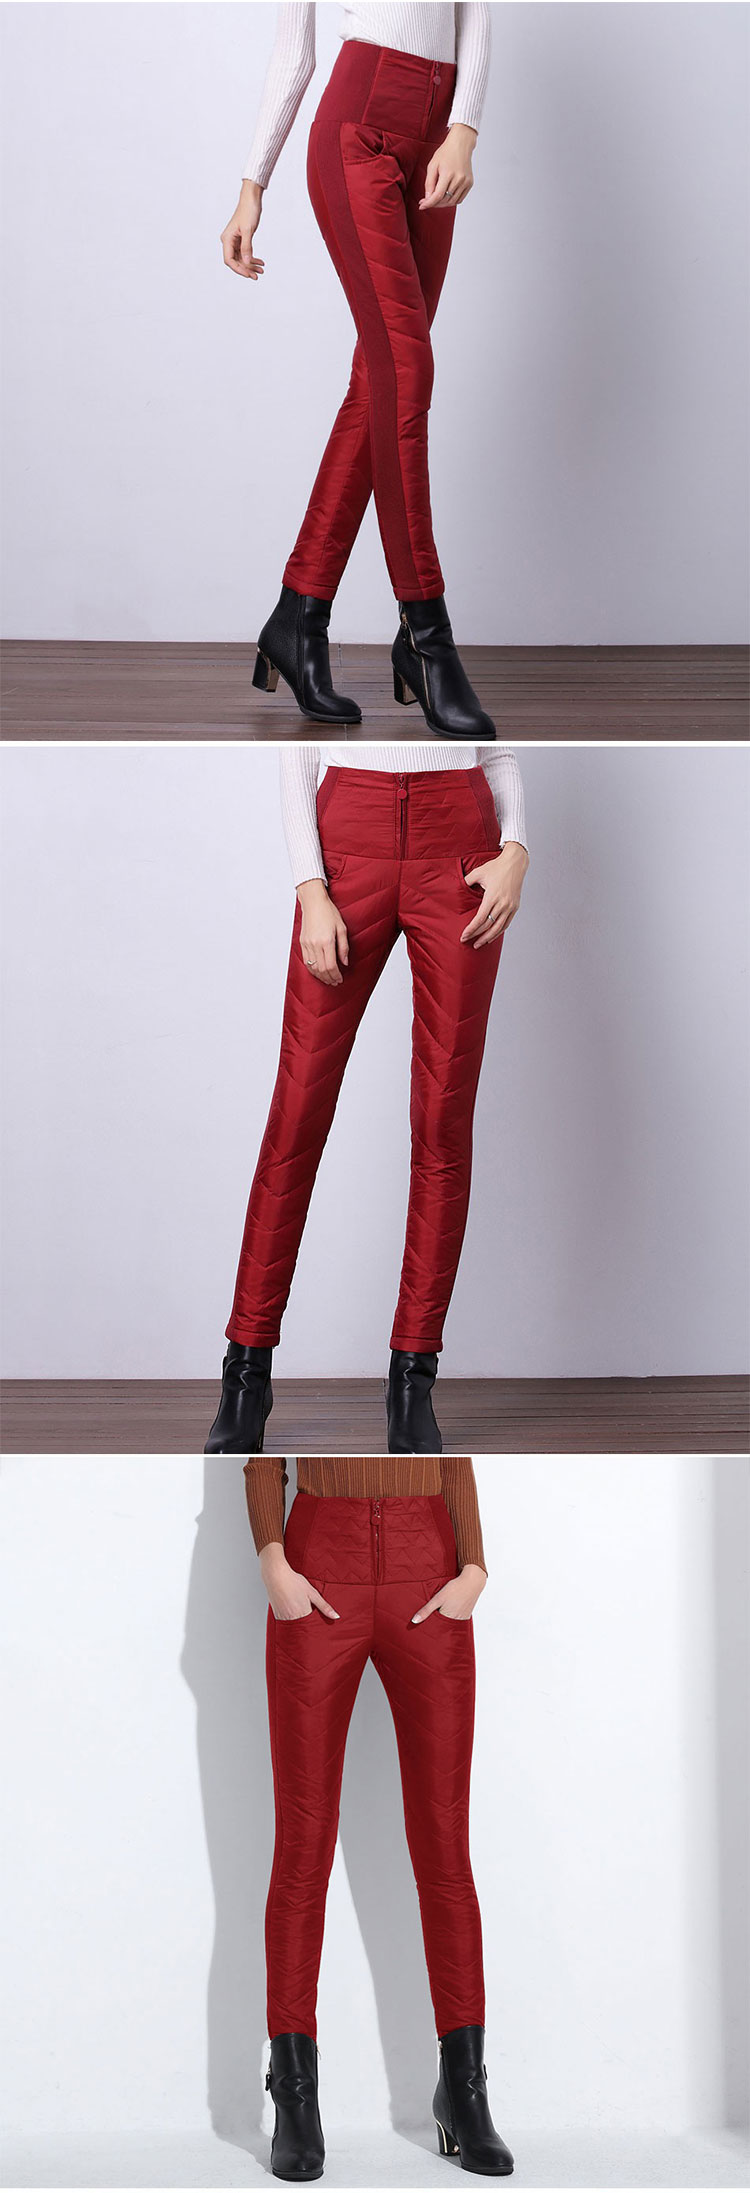 Casual and formal classic winter lady down pants